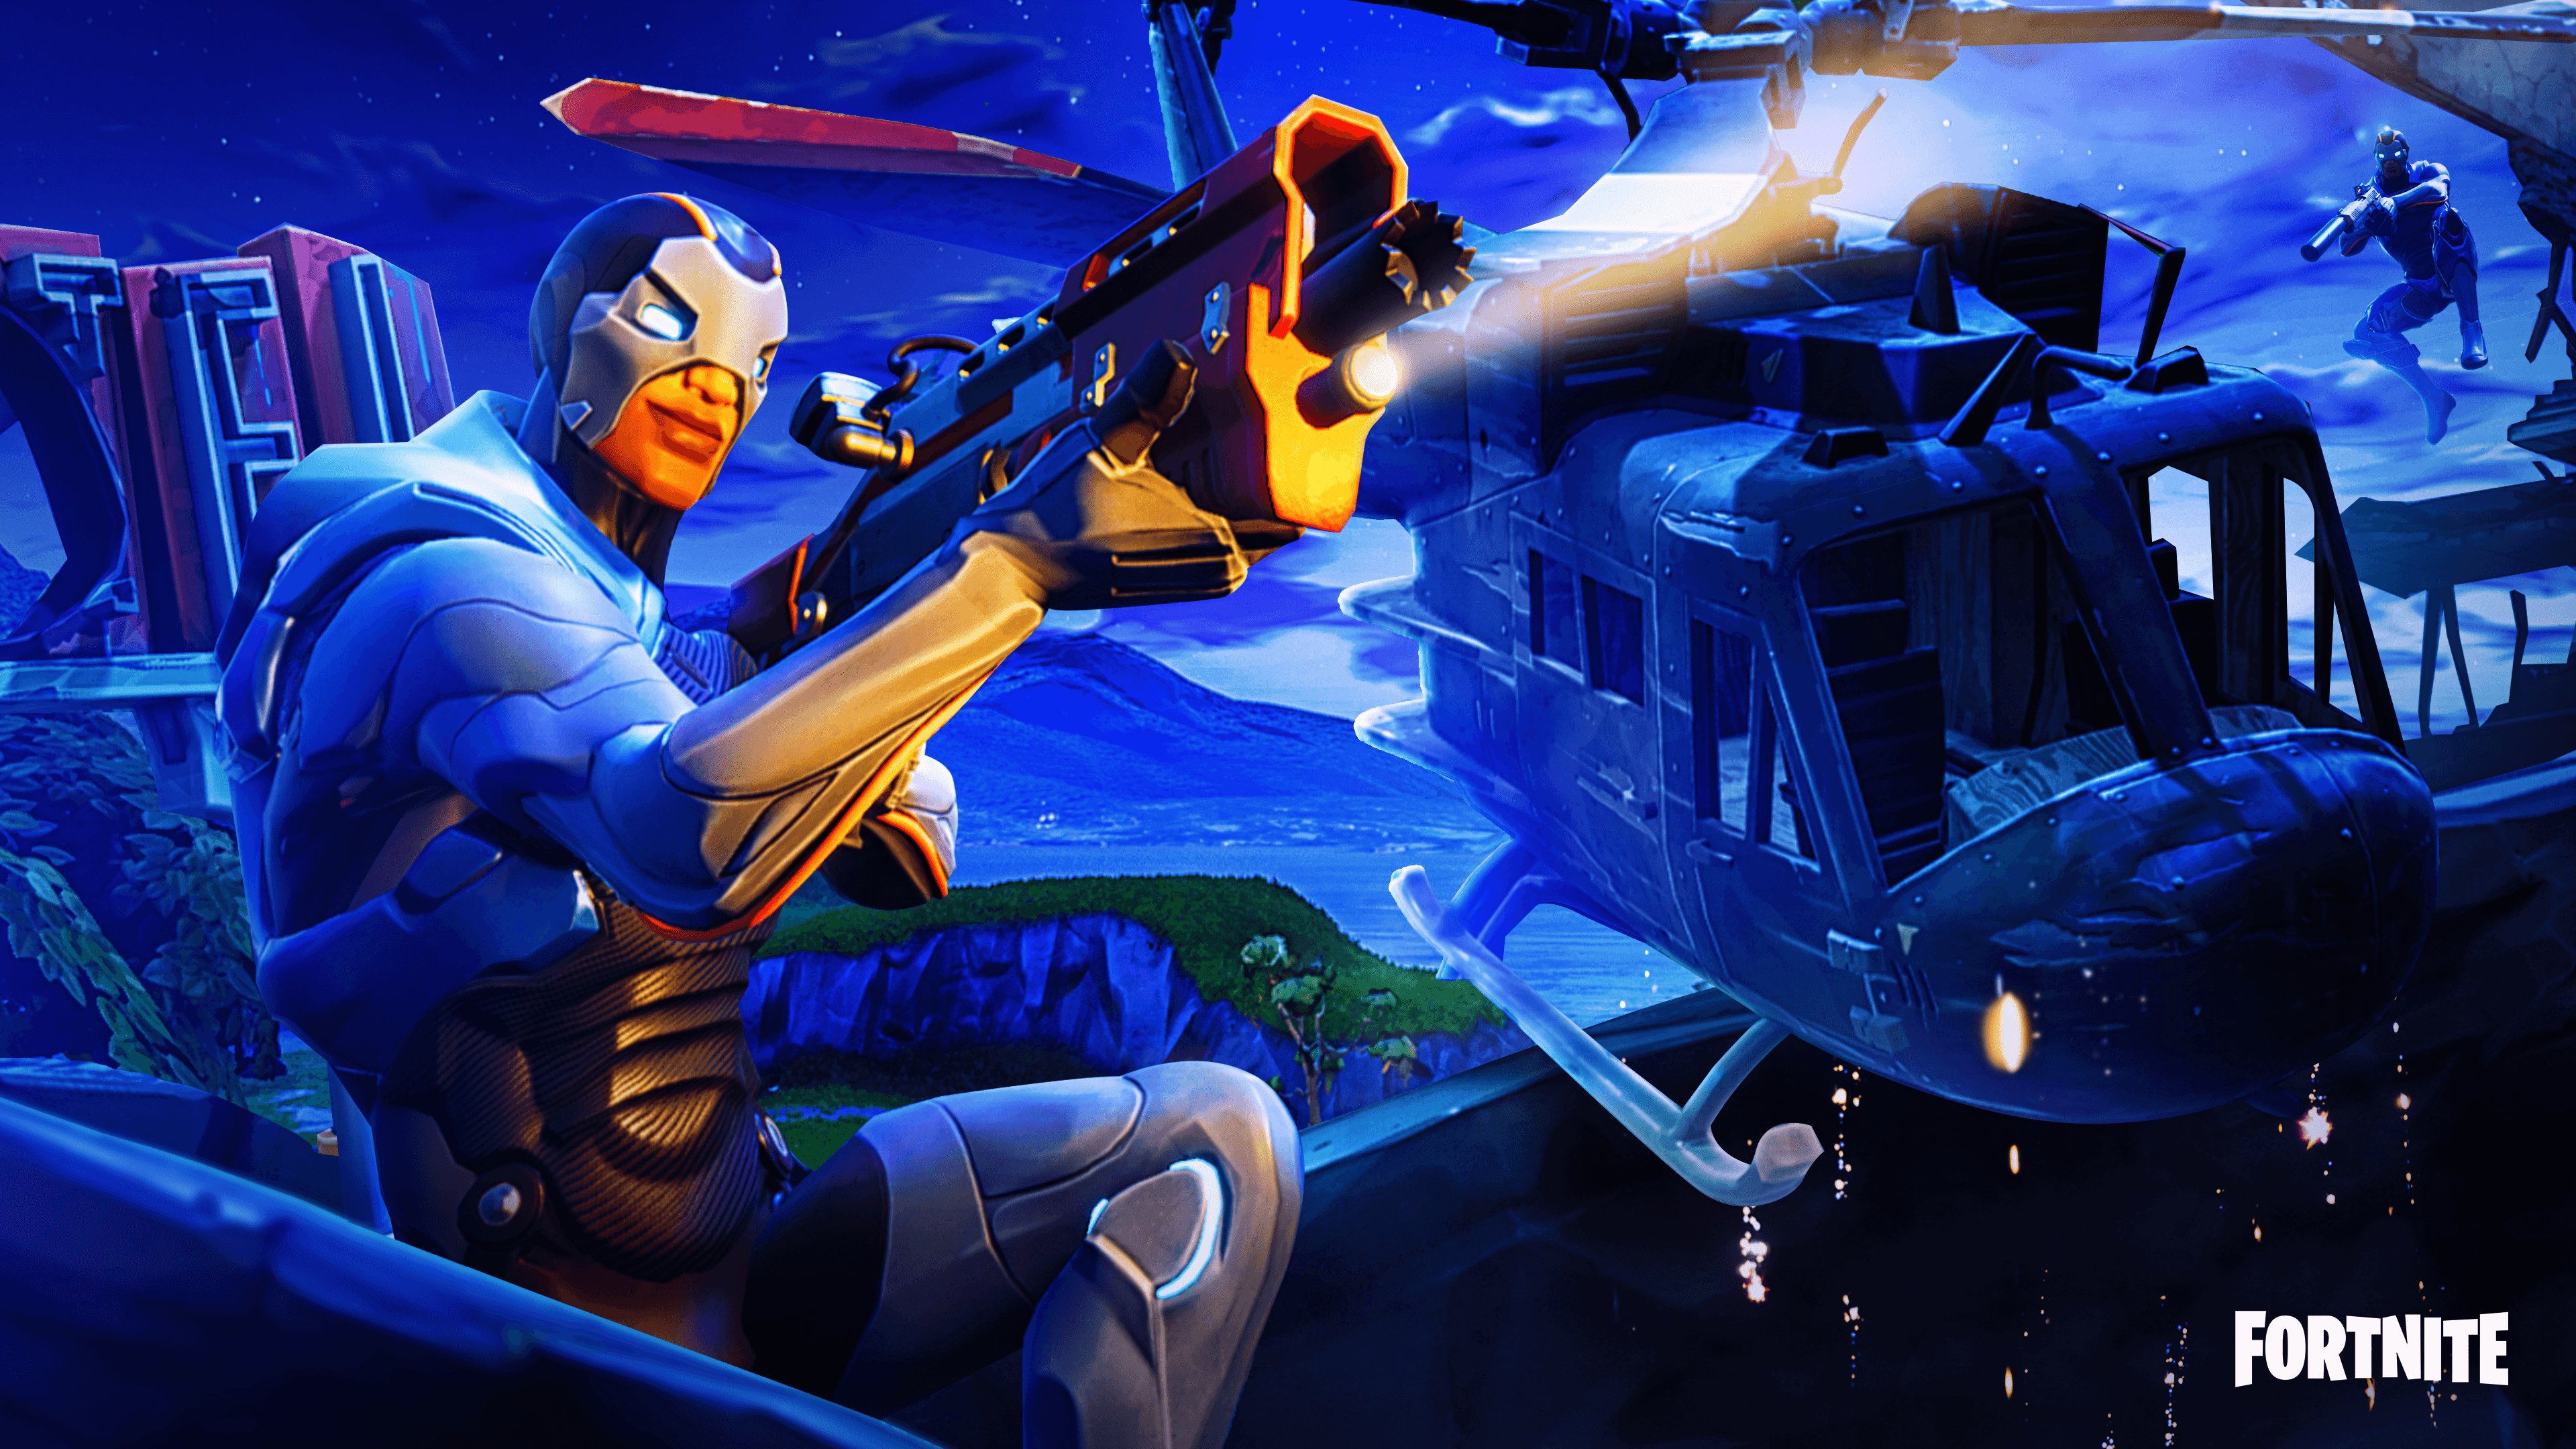 Season 4 fortnite skin 4k Ultra HD Wallpapers and Backgrounds Image